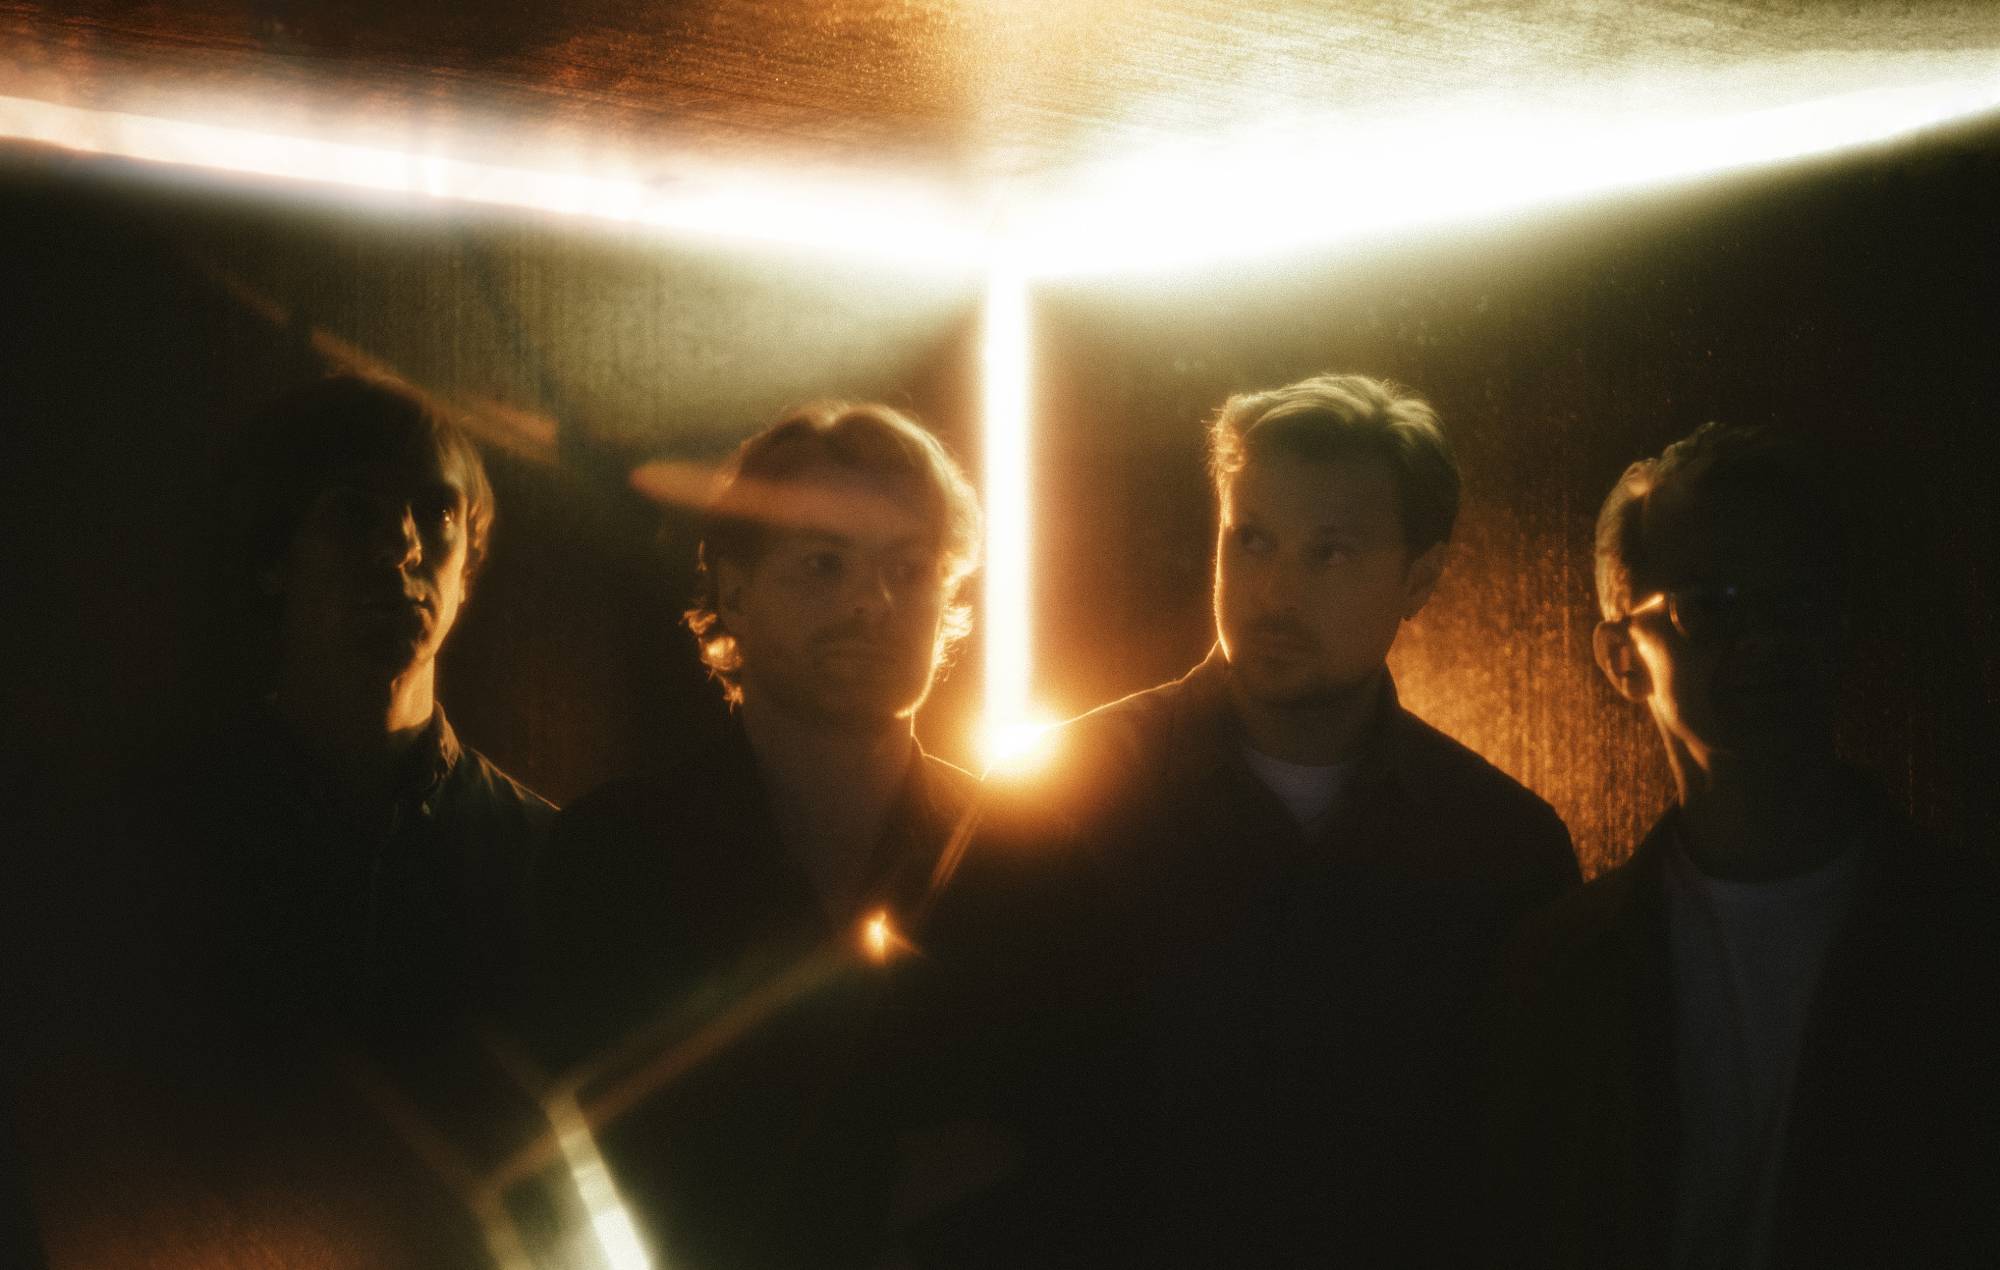 Django Django: “Sometimes you just want to escape and imagine that you’re someone else”